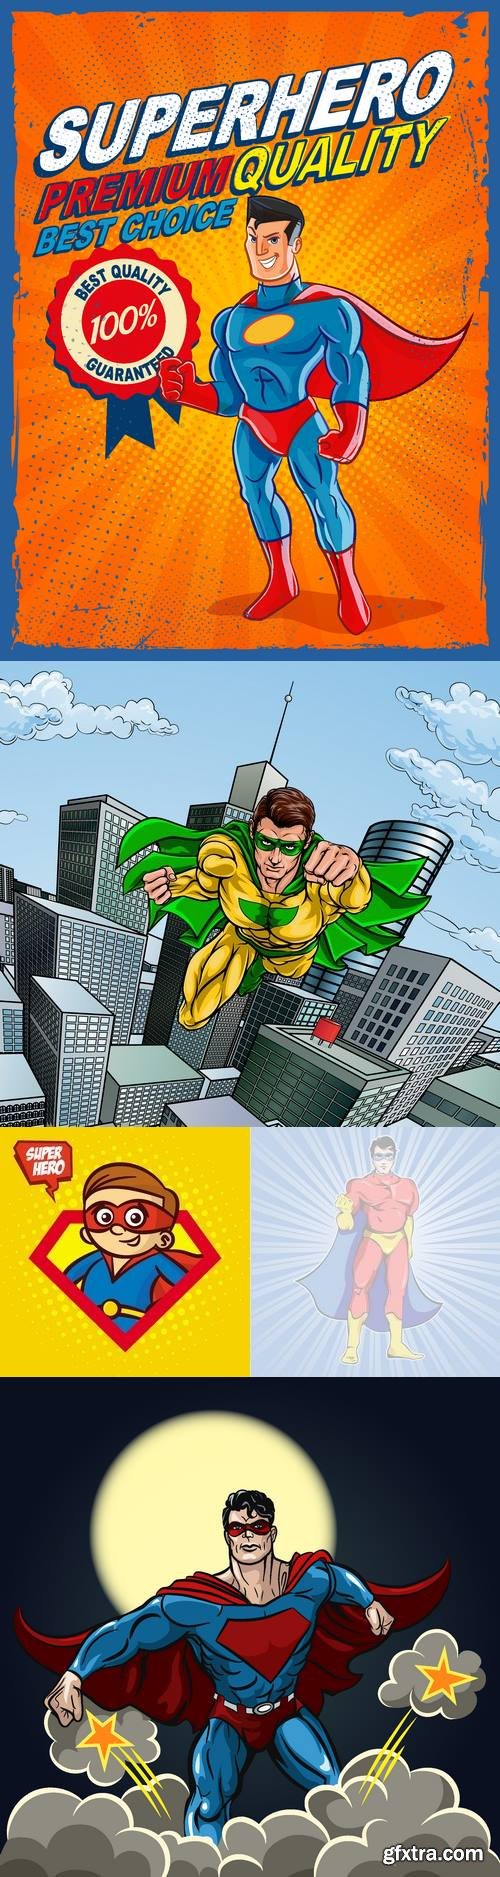 Vectors - Backgrounds with Superheroes 6